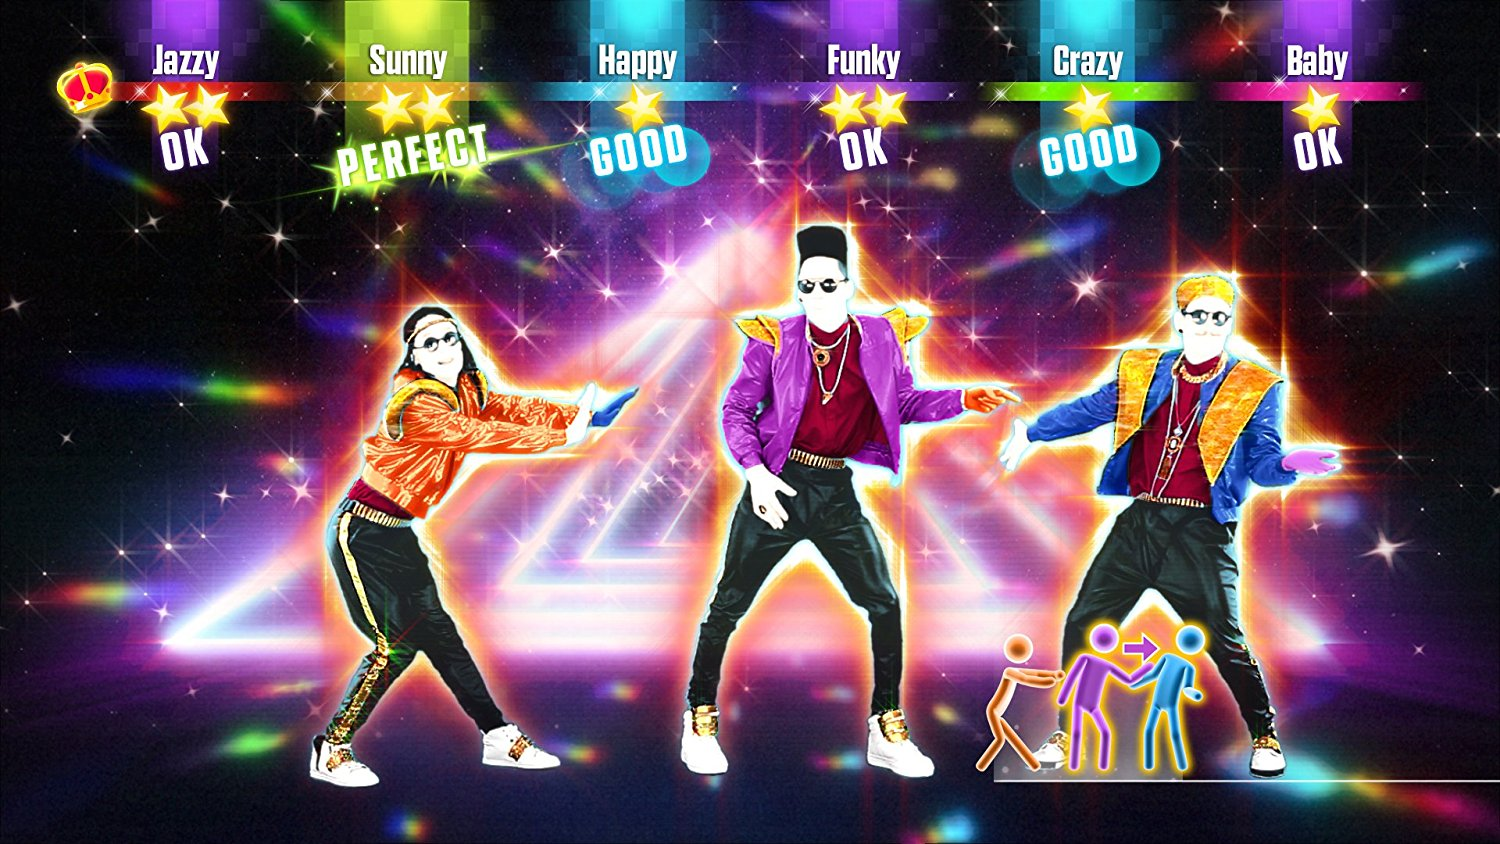 Just Dance 2016 4] - [PlayStation